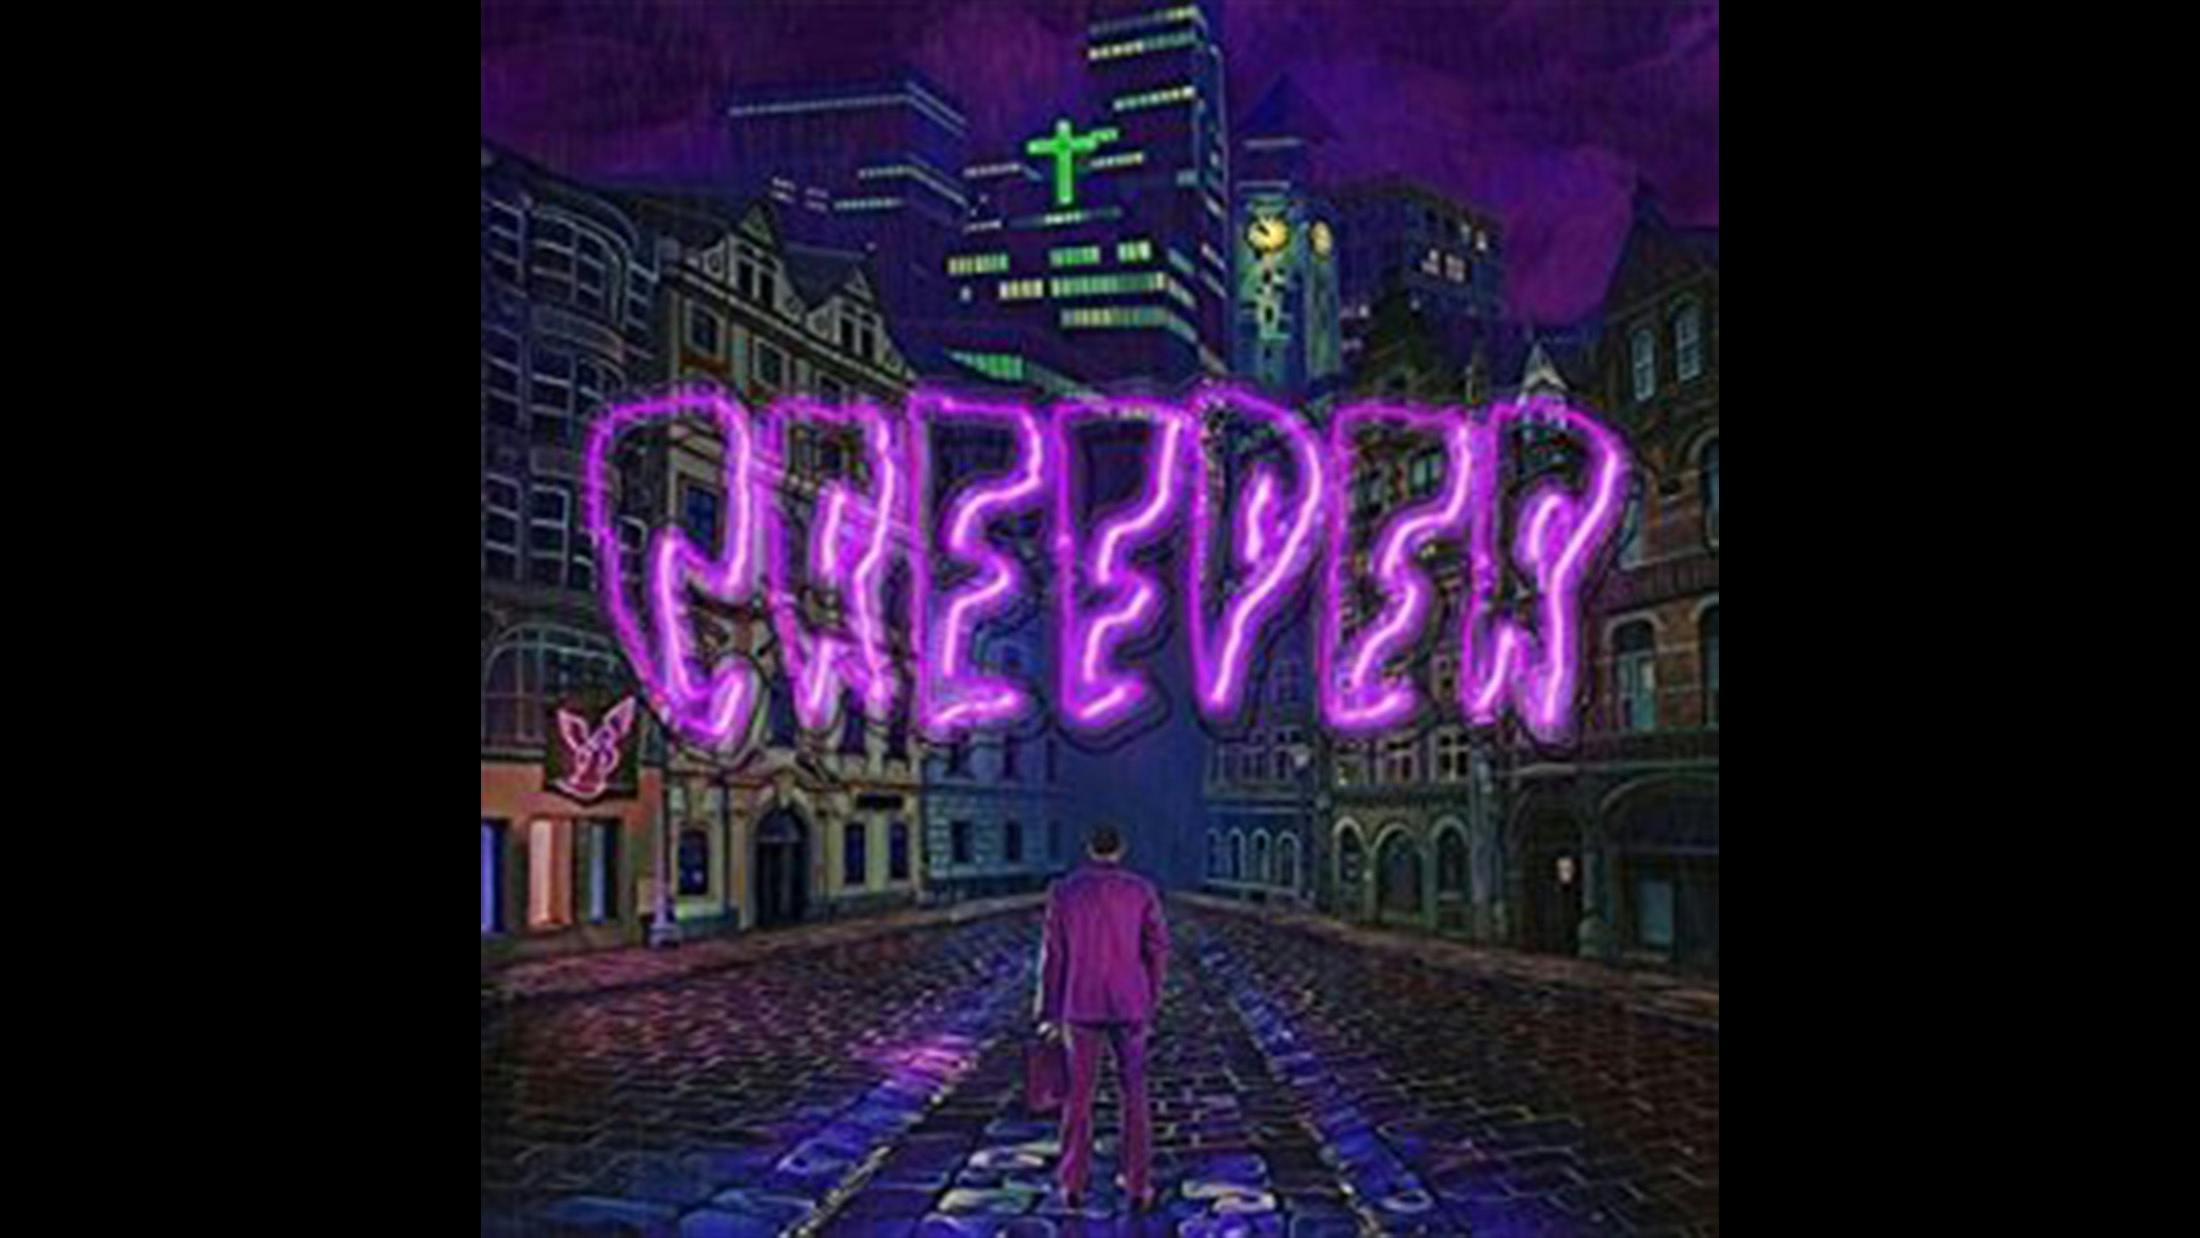 "Ever since I first heard Creeper, I've been in love with their sound. Eternity finds some of the best songs Creeper has created; displaying their impeccable brand of melodic, catchy, epic punk rock."